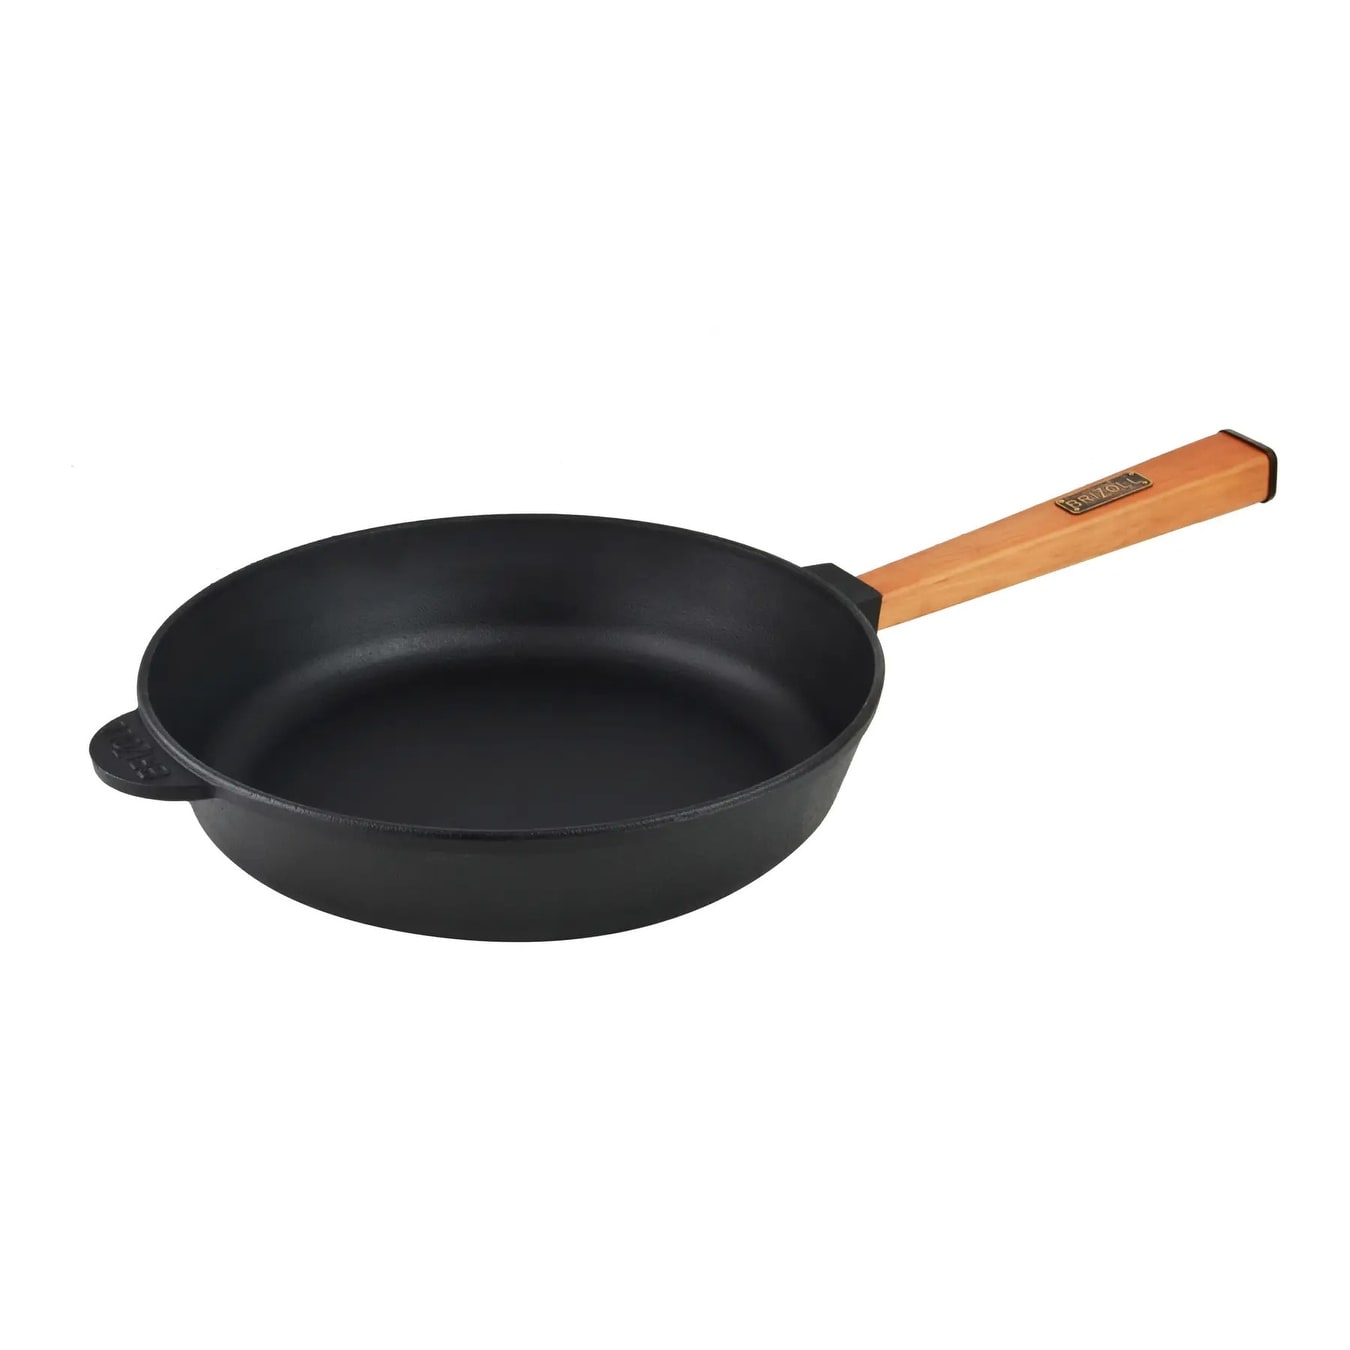 https://ak1.ostkcdn.com/images/products/is/images/direct/d3d3afd6ed2a9a36657d52b6be5b9342e08600c6/Brizoll-Cast-Iron-Deep-Frying-Pan-w--Removable-Handle.jpg